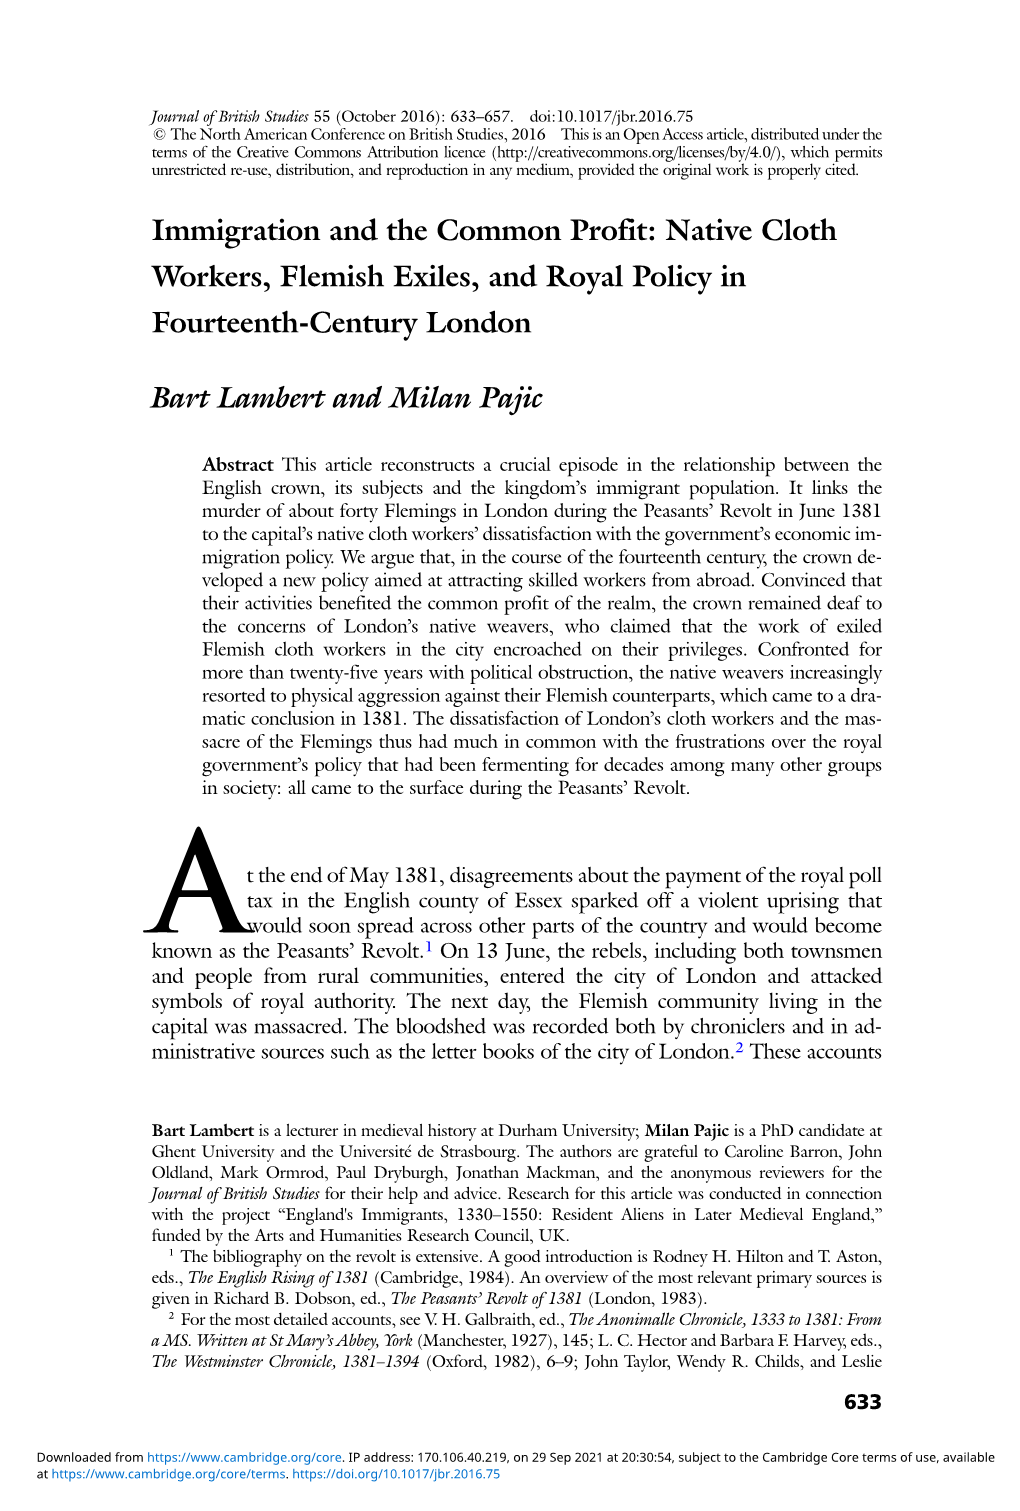 Immigration and the Common Profit: Native Cloth Workers, Flemish Exiles, and Royal Policy in Fourteenth-Century London